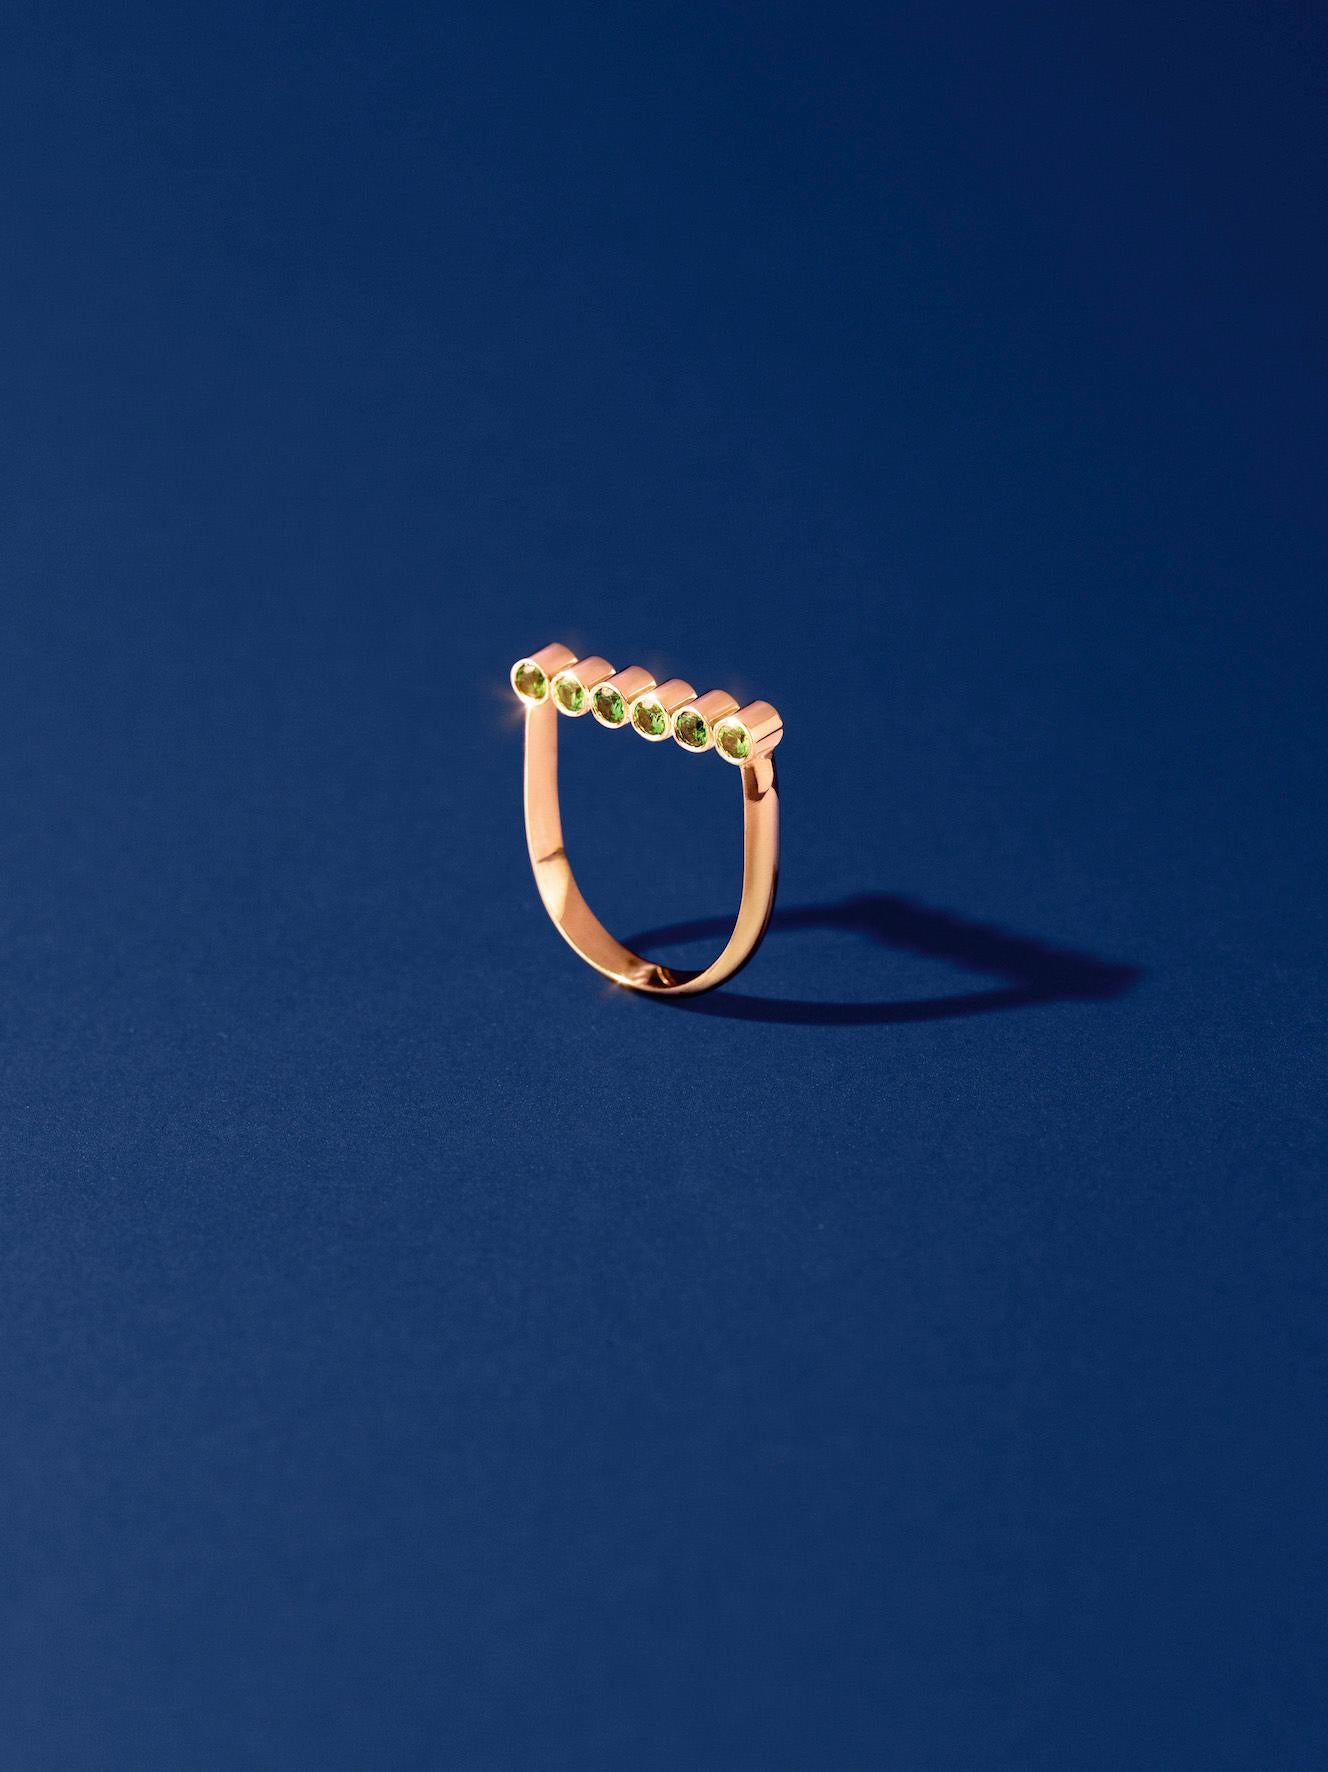 Mirage is a series of rings made up of 1, 4 or 6 18k gold tubes set on either side with colored gems, Mirage reveals color and shine through movement.
SIZE : 54